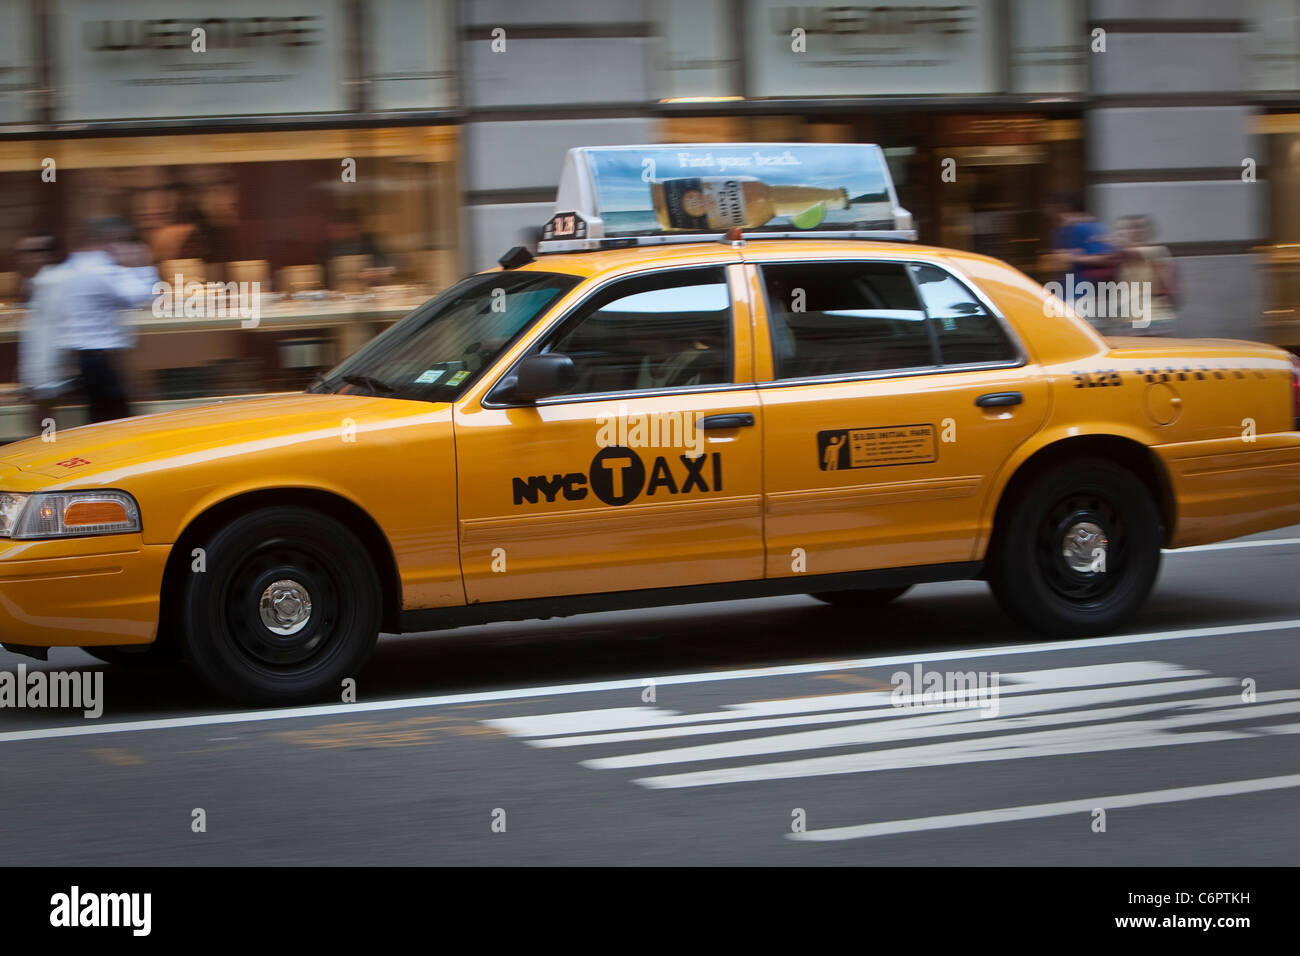 A NYC Taxi is pictured in the New York City borough of Manhattan, NY, Tuesday August 2, 2011. Stock Photo